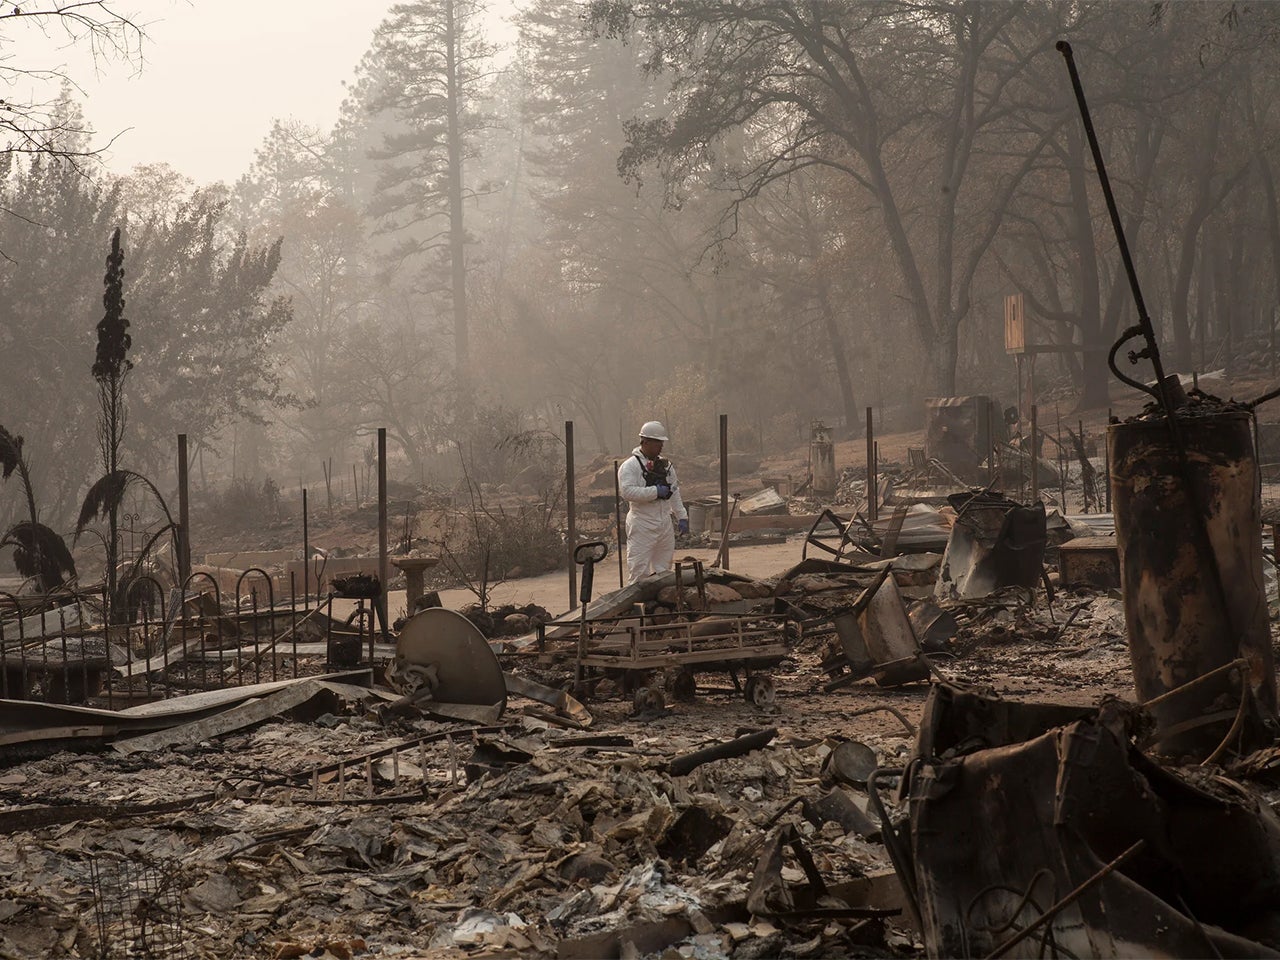 National Guard soldier in a white suit searches burned debris after 2018’s Camp Fire in Paradise, California